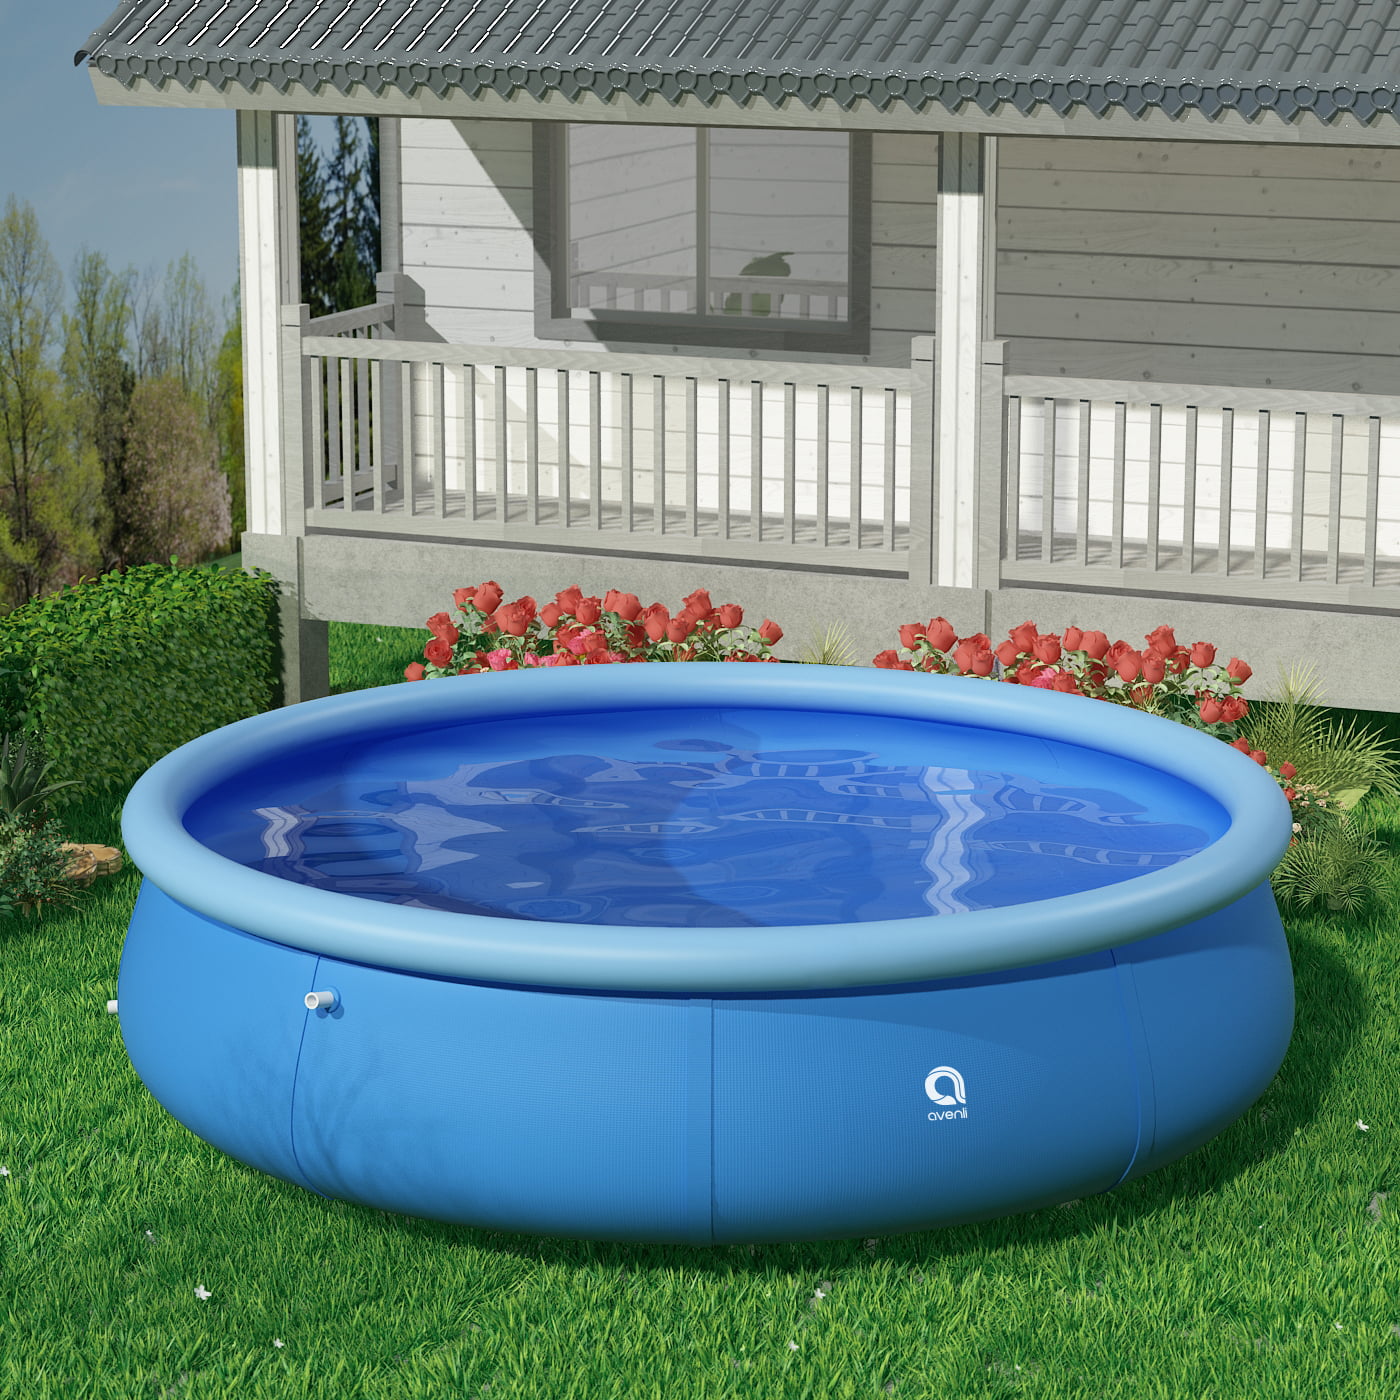 Backyard/Outdoor Blow Up Pools for Kids and Adults Family Inflatable Swimming Pool Above Ground 12ft x 30in